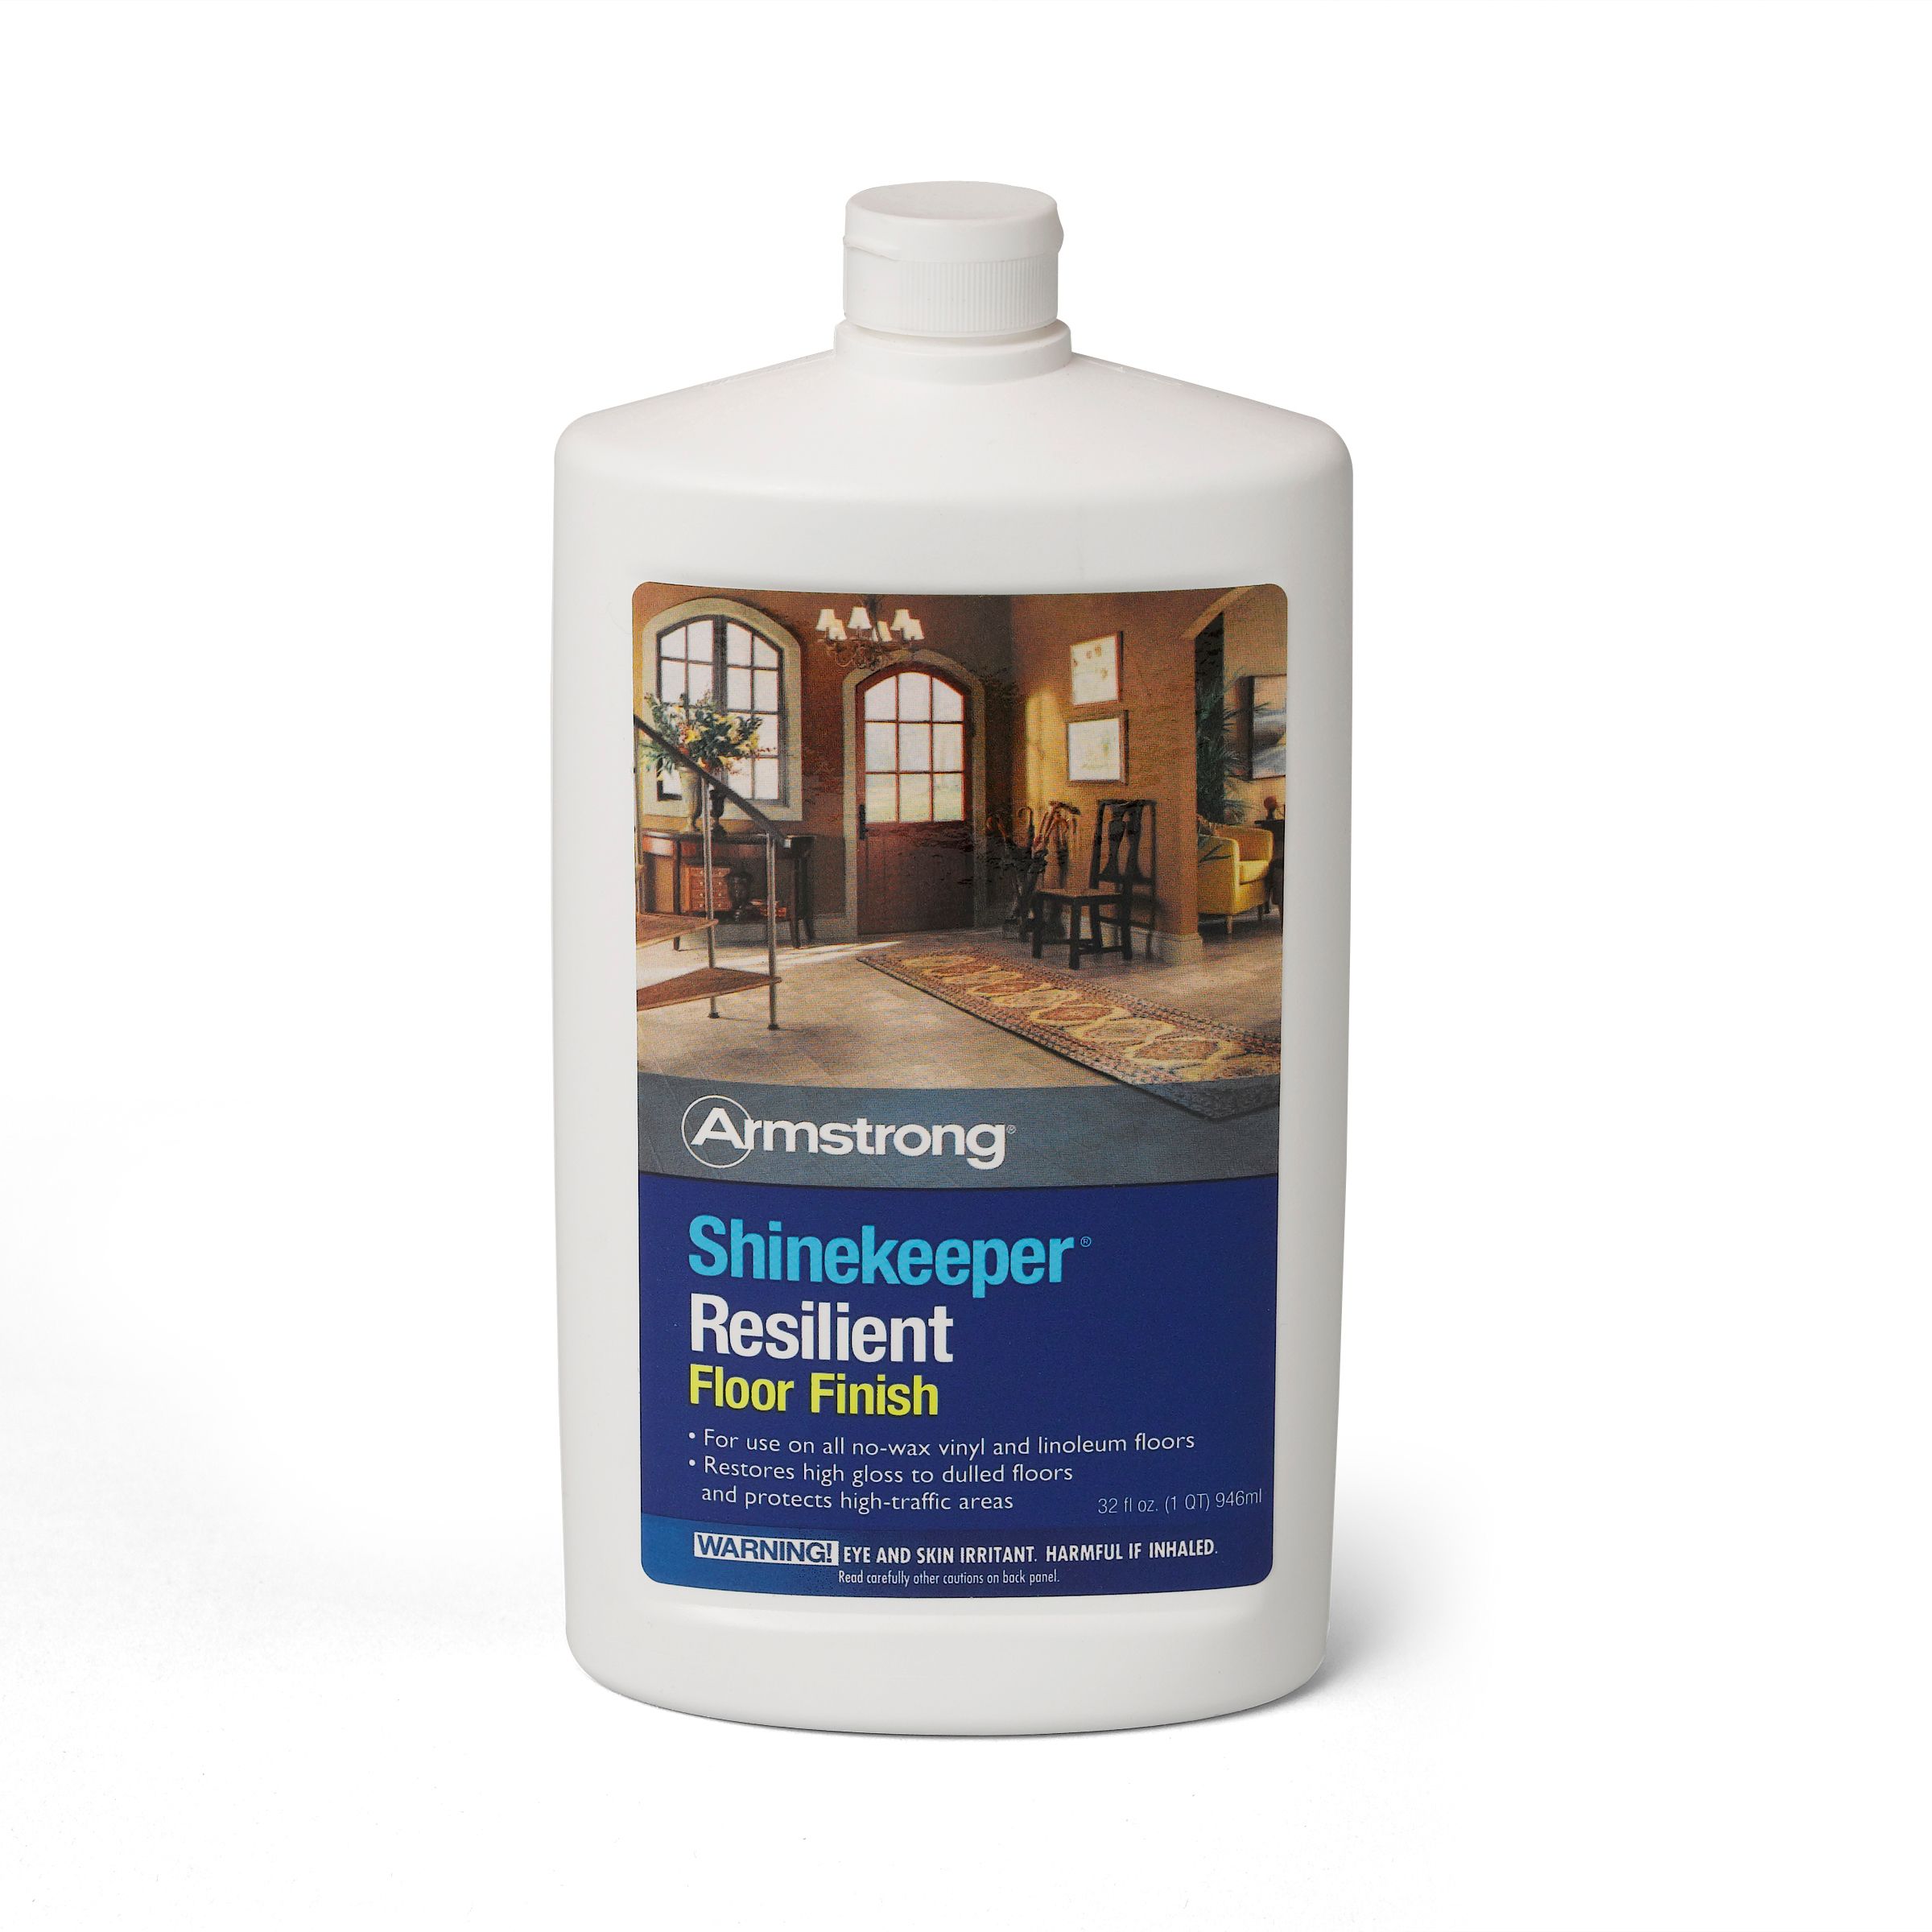 Armstrong Shinekeeper Resilient Floor Finish